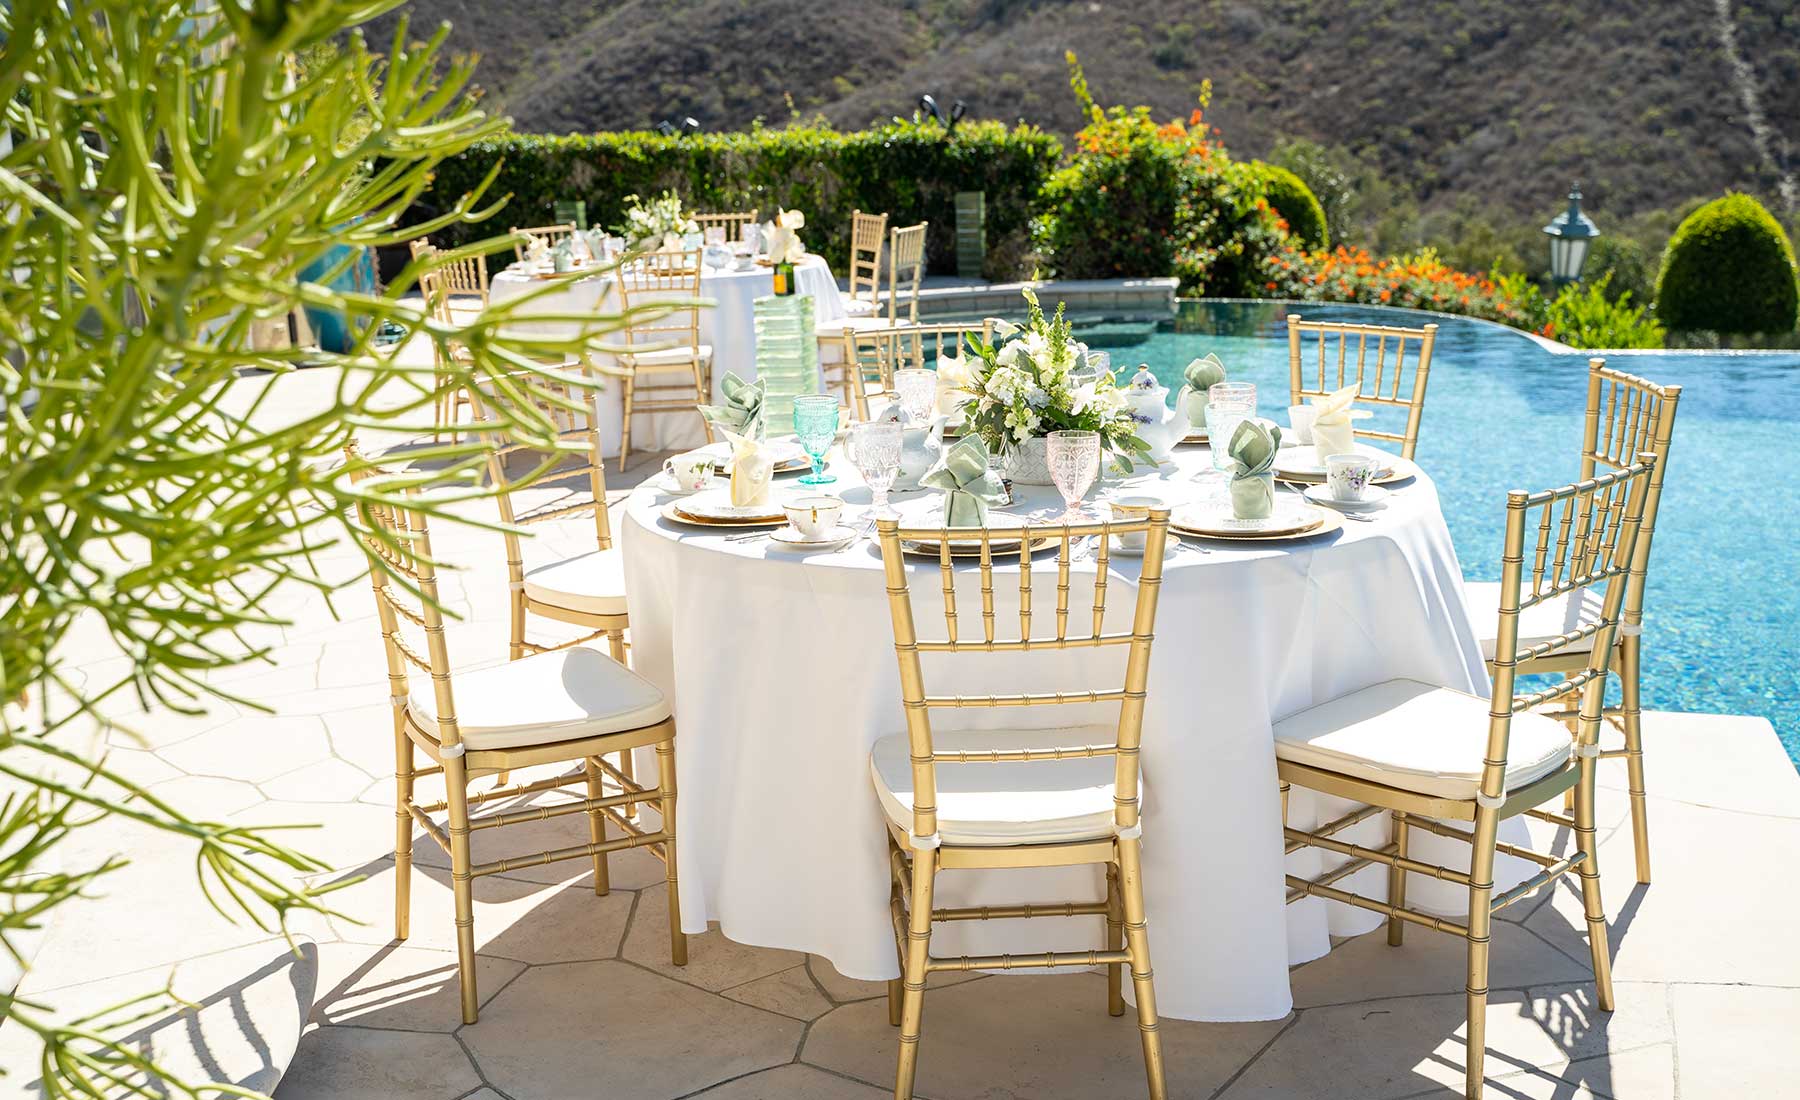 Poolside catering set up with chairs, tables, and china.